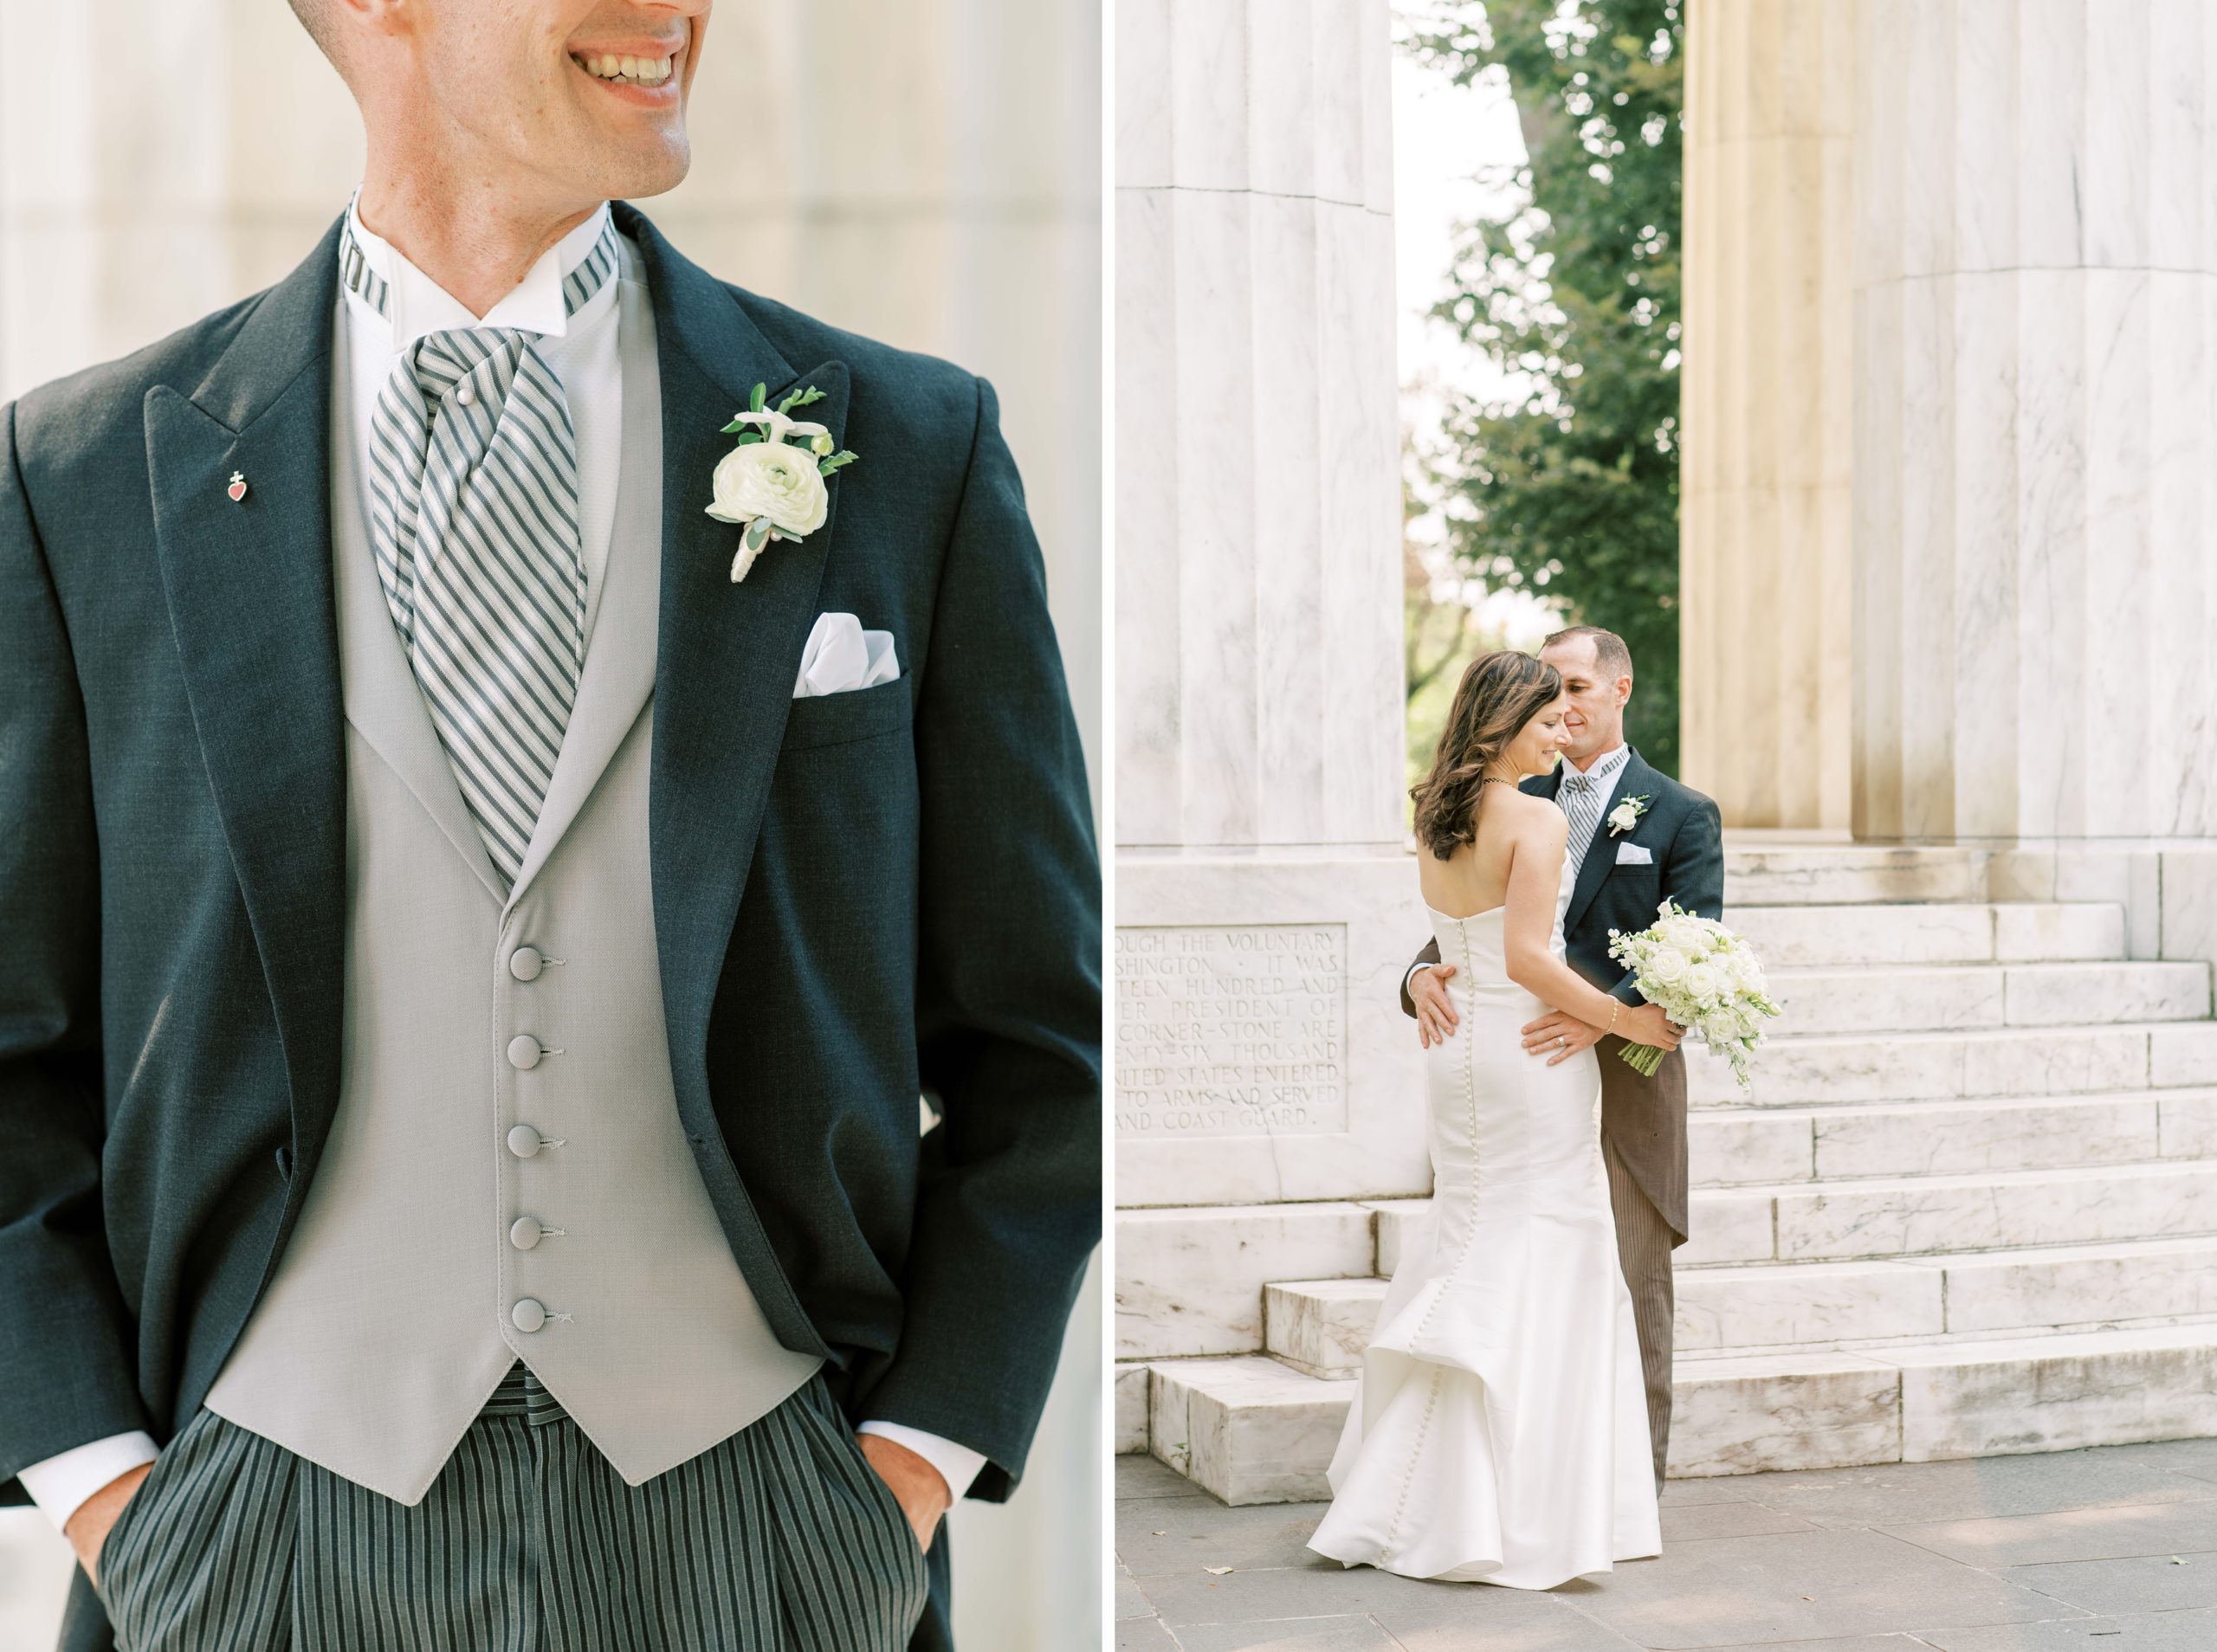 A romantic elopement wedding at St. Matthews Cathedral in Washington, DC with portraits at the DC War Memorial and Lincoln Memorial.